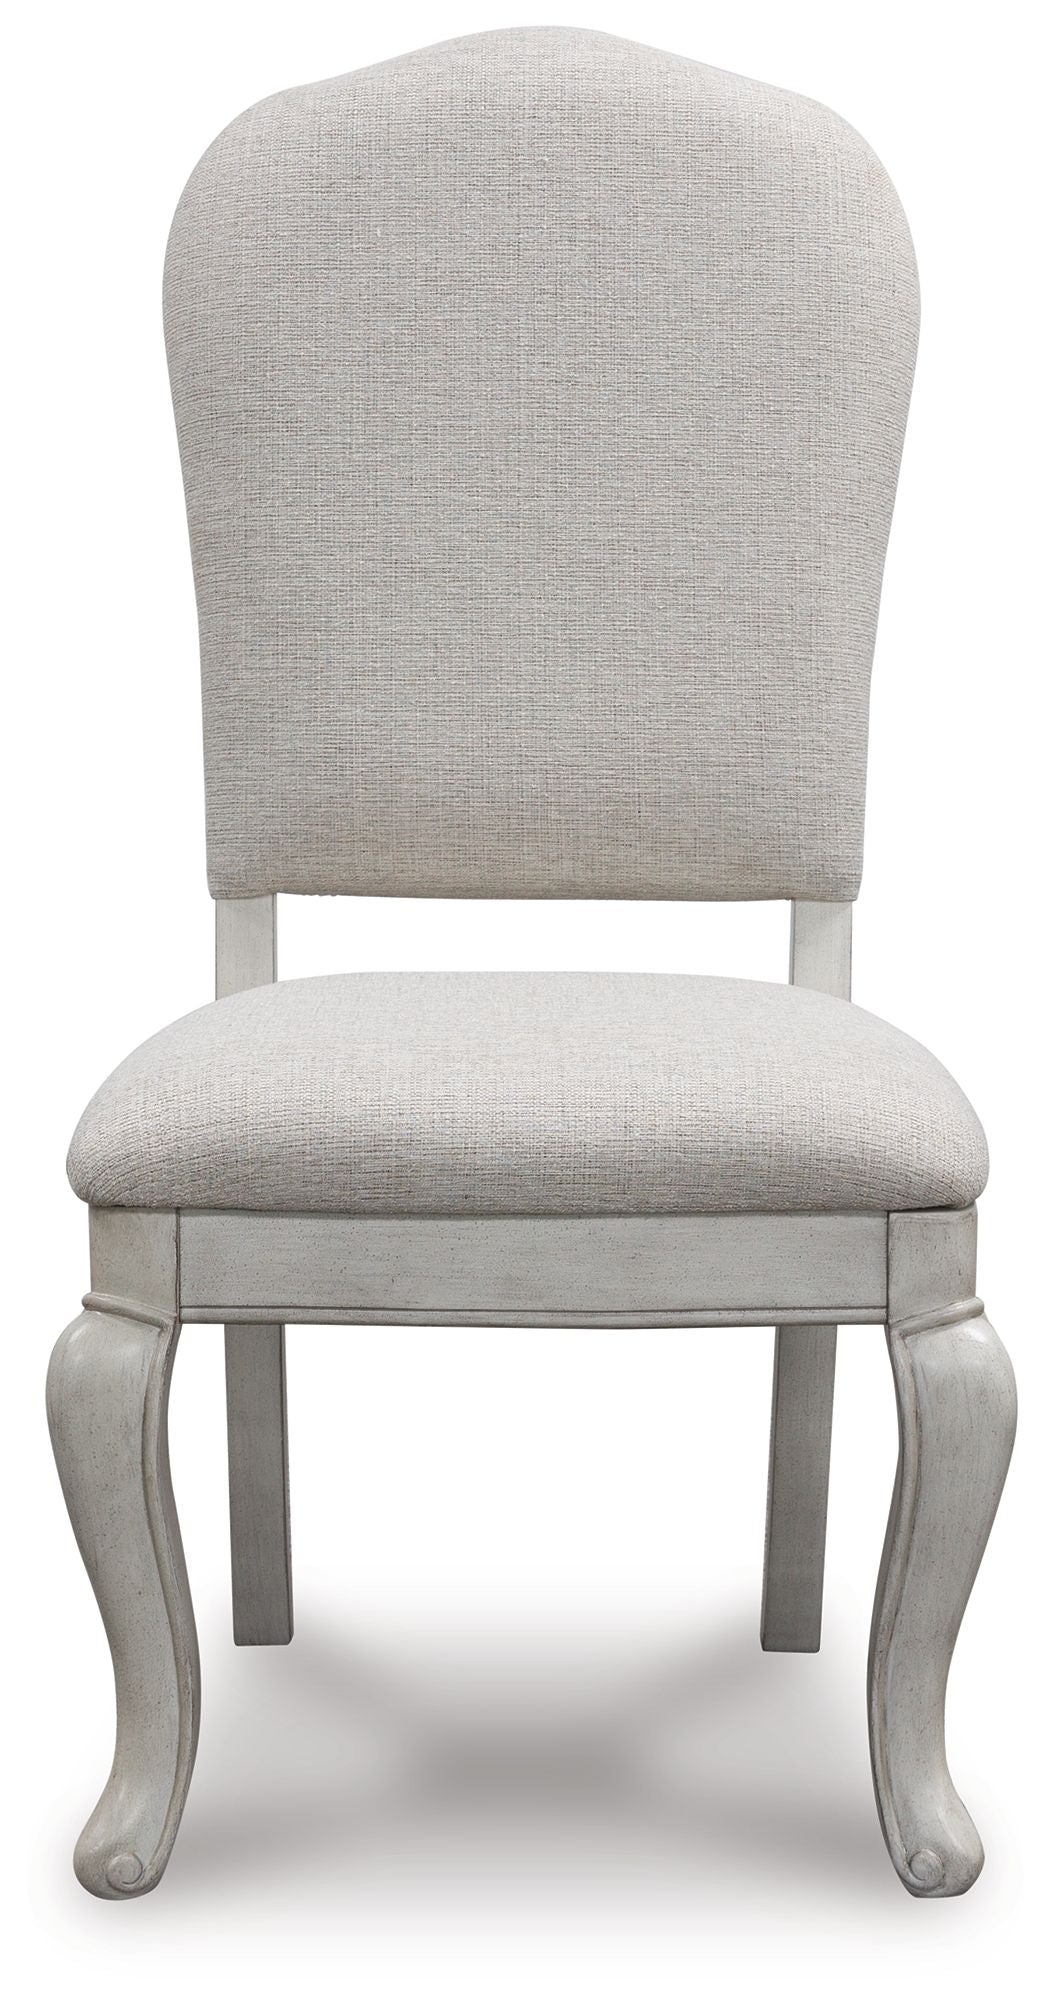 Arlendyne - Antique White - Dining Uph Side Chair (Set of 2) - Tony's Home Furnishings